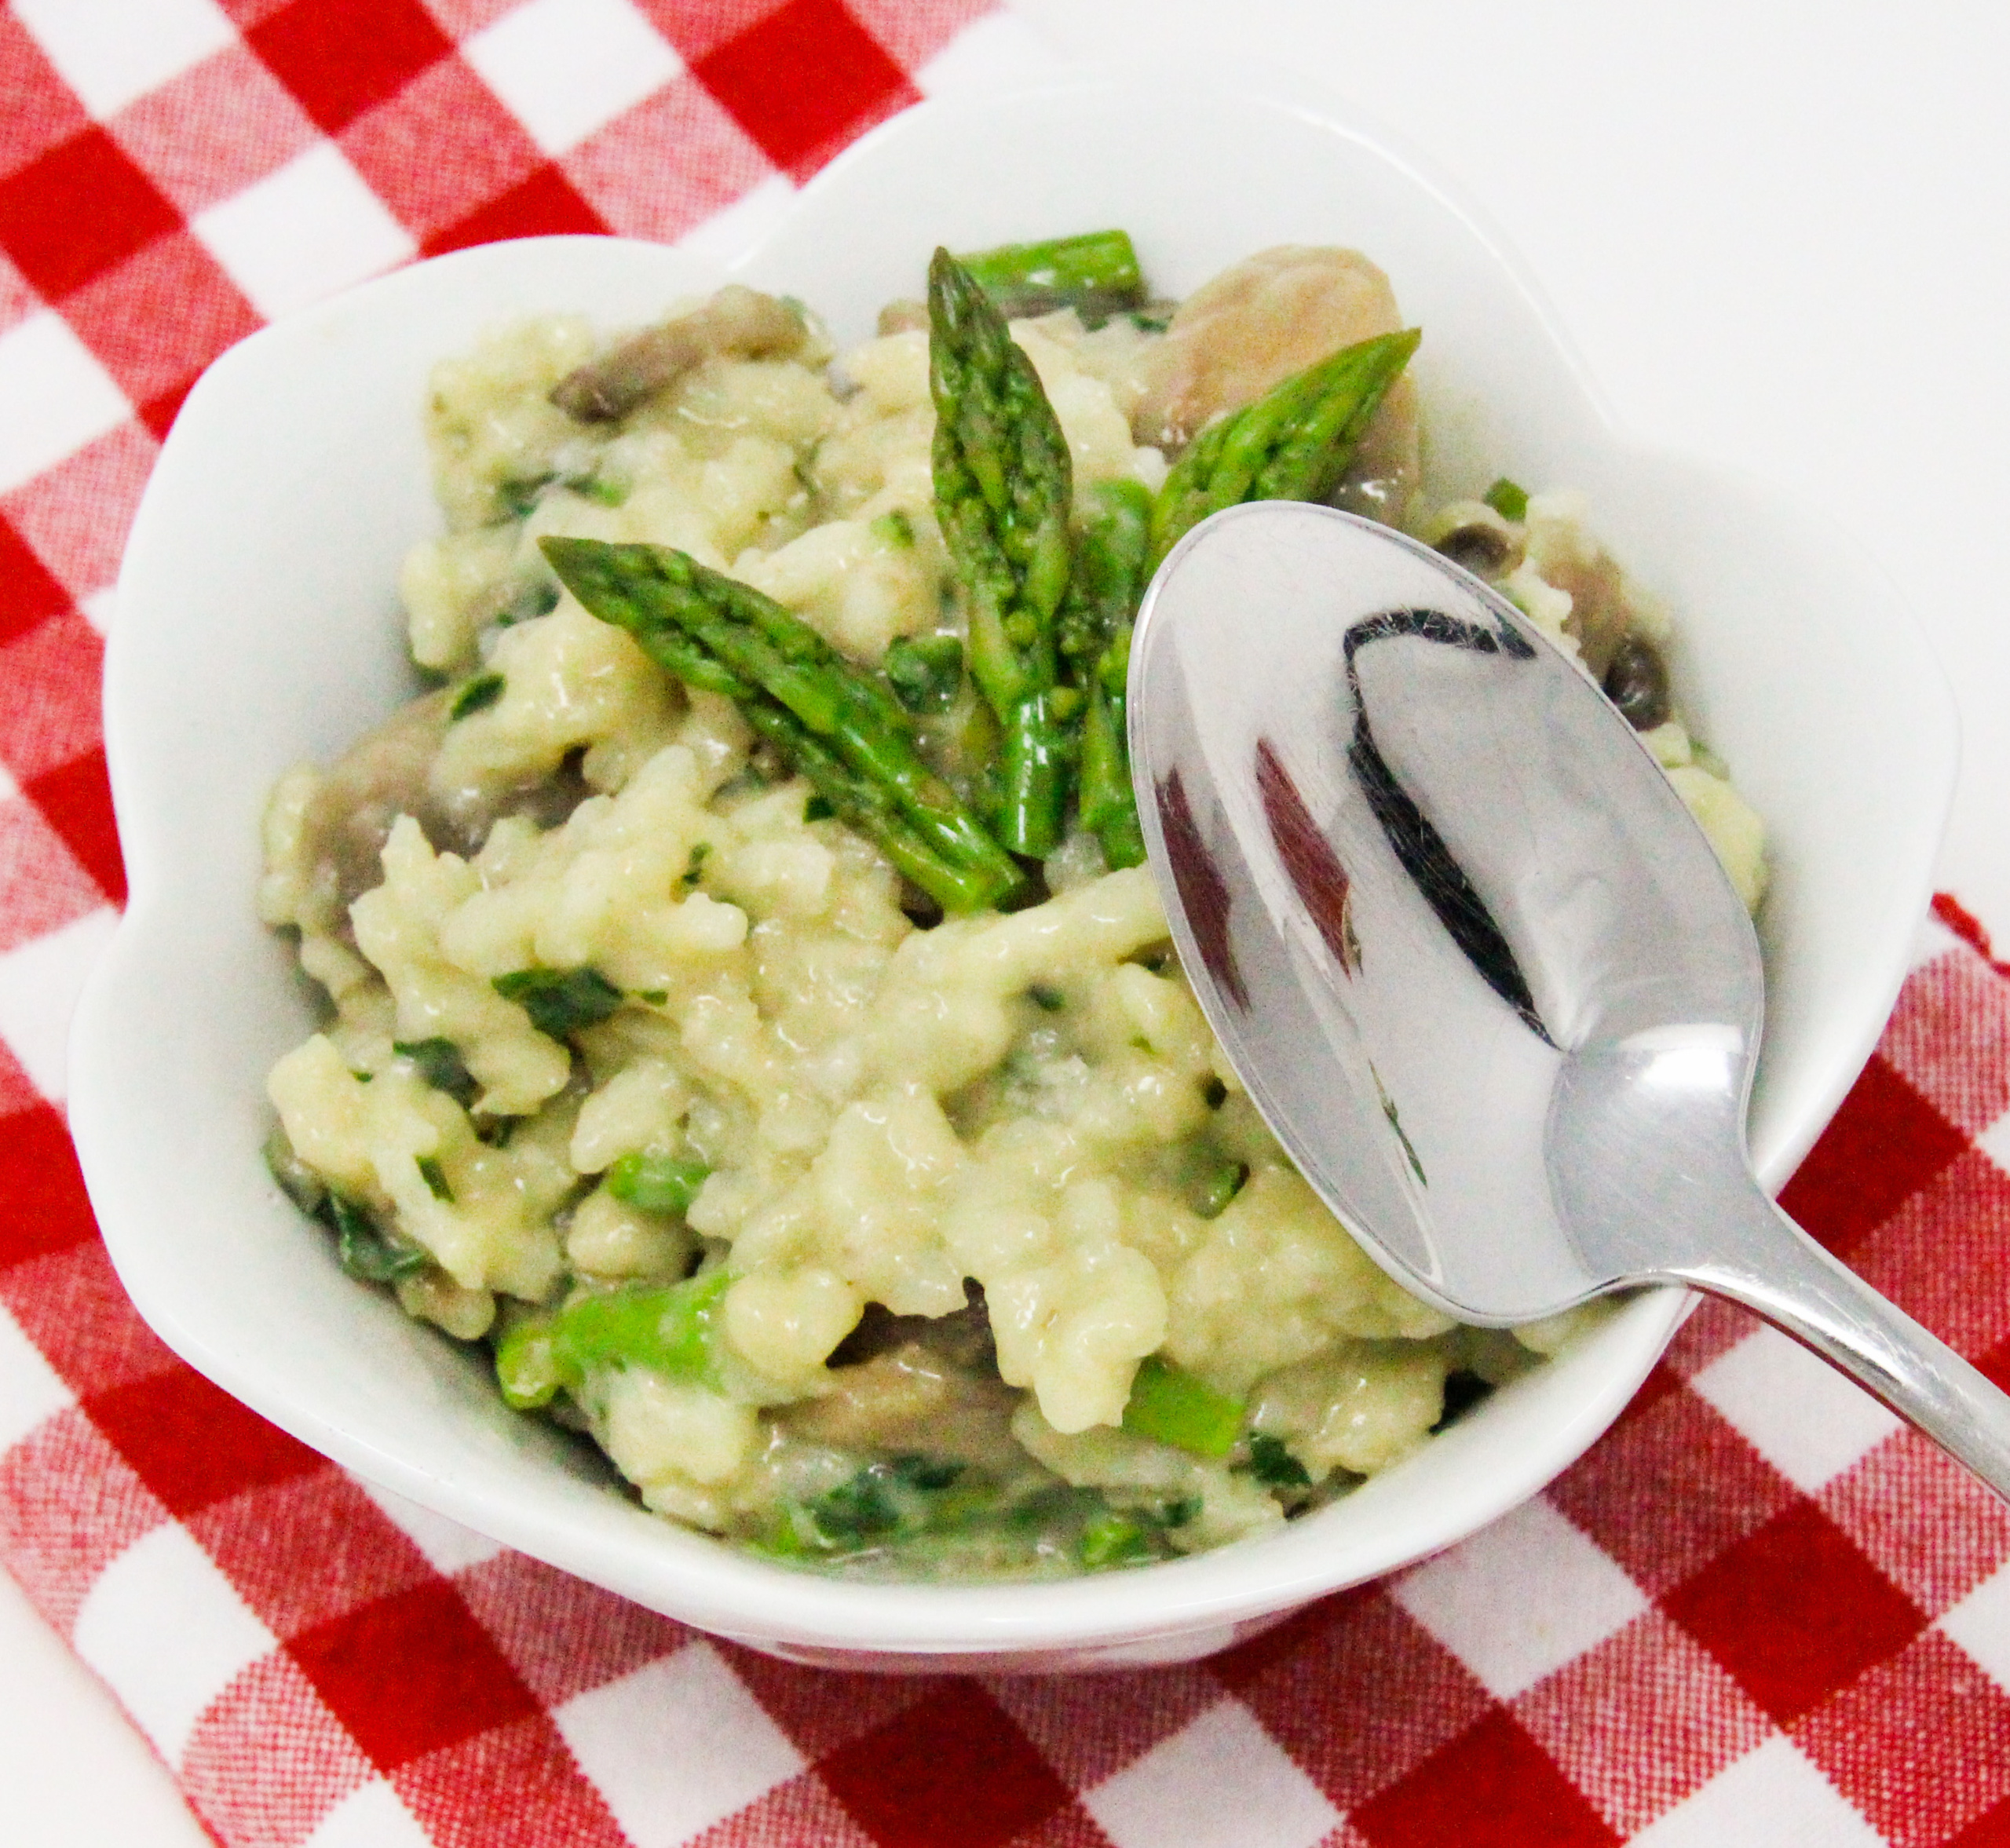 Workday Quick and Easy Risotto has lots of vegetables to complement the creamy Arborio rice. Perfect as both a side dish or serve as a main course. Recipe shared with permission granted by Lynn Cahoon, author of A FATAL FAMILY FEAST. 